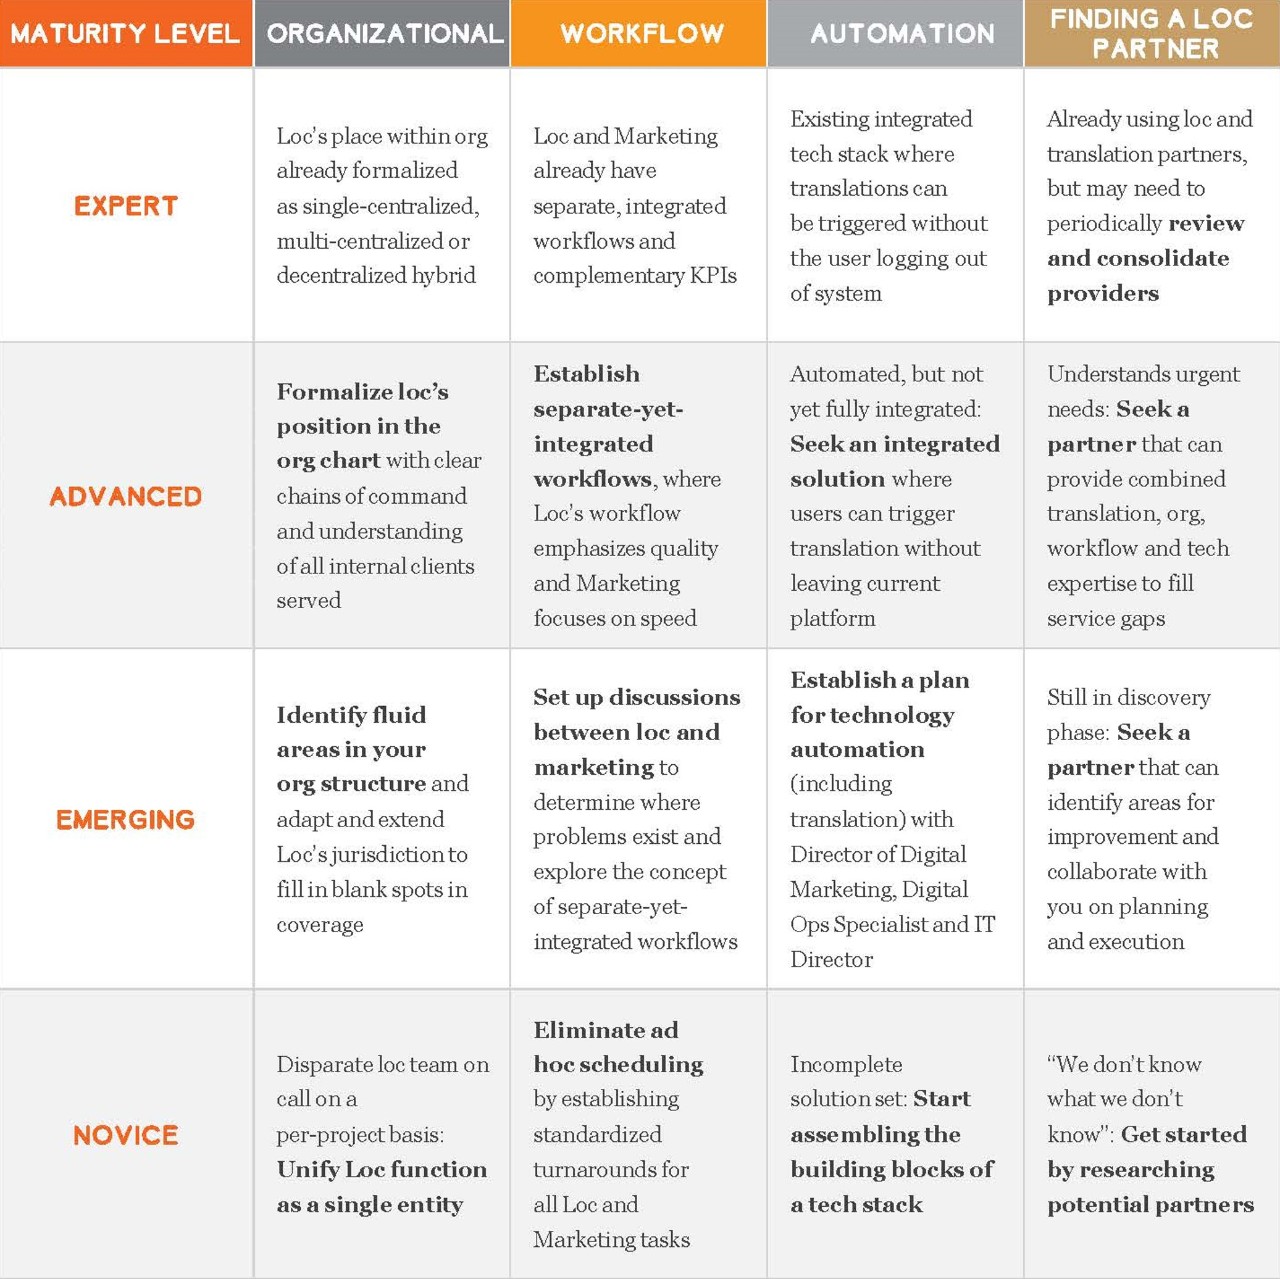 infographic chart recommending actions based on maturity level